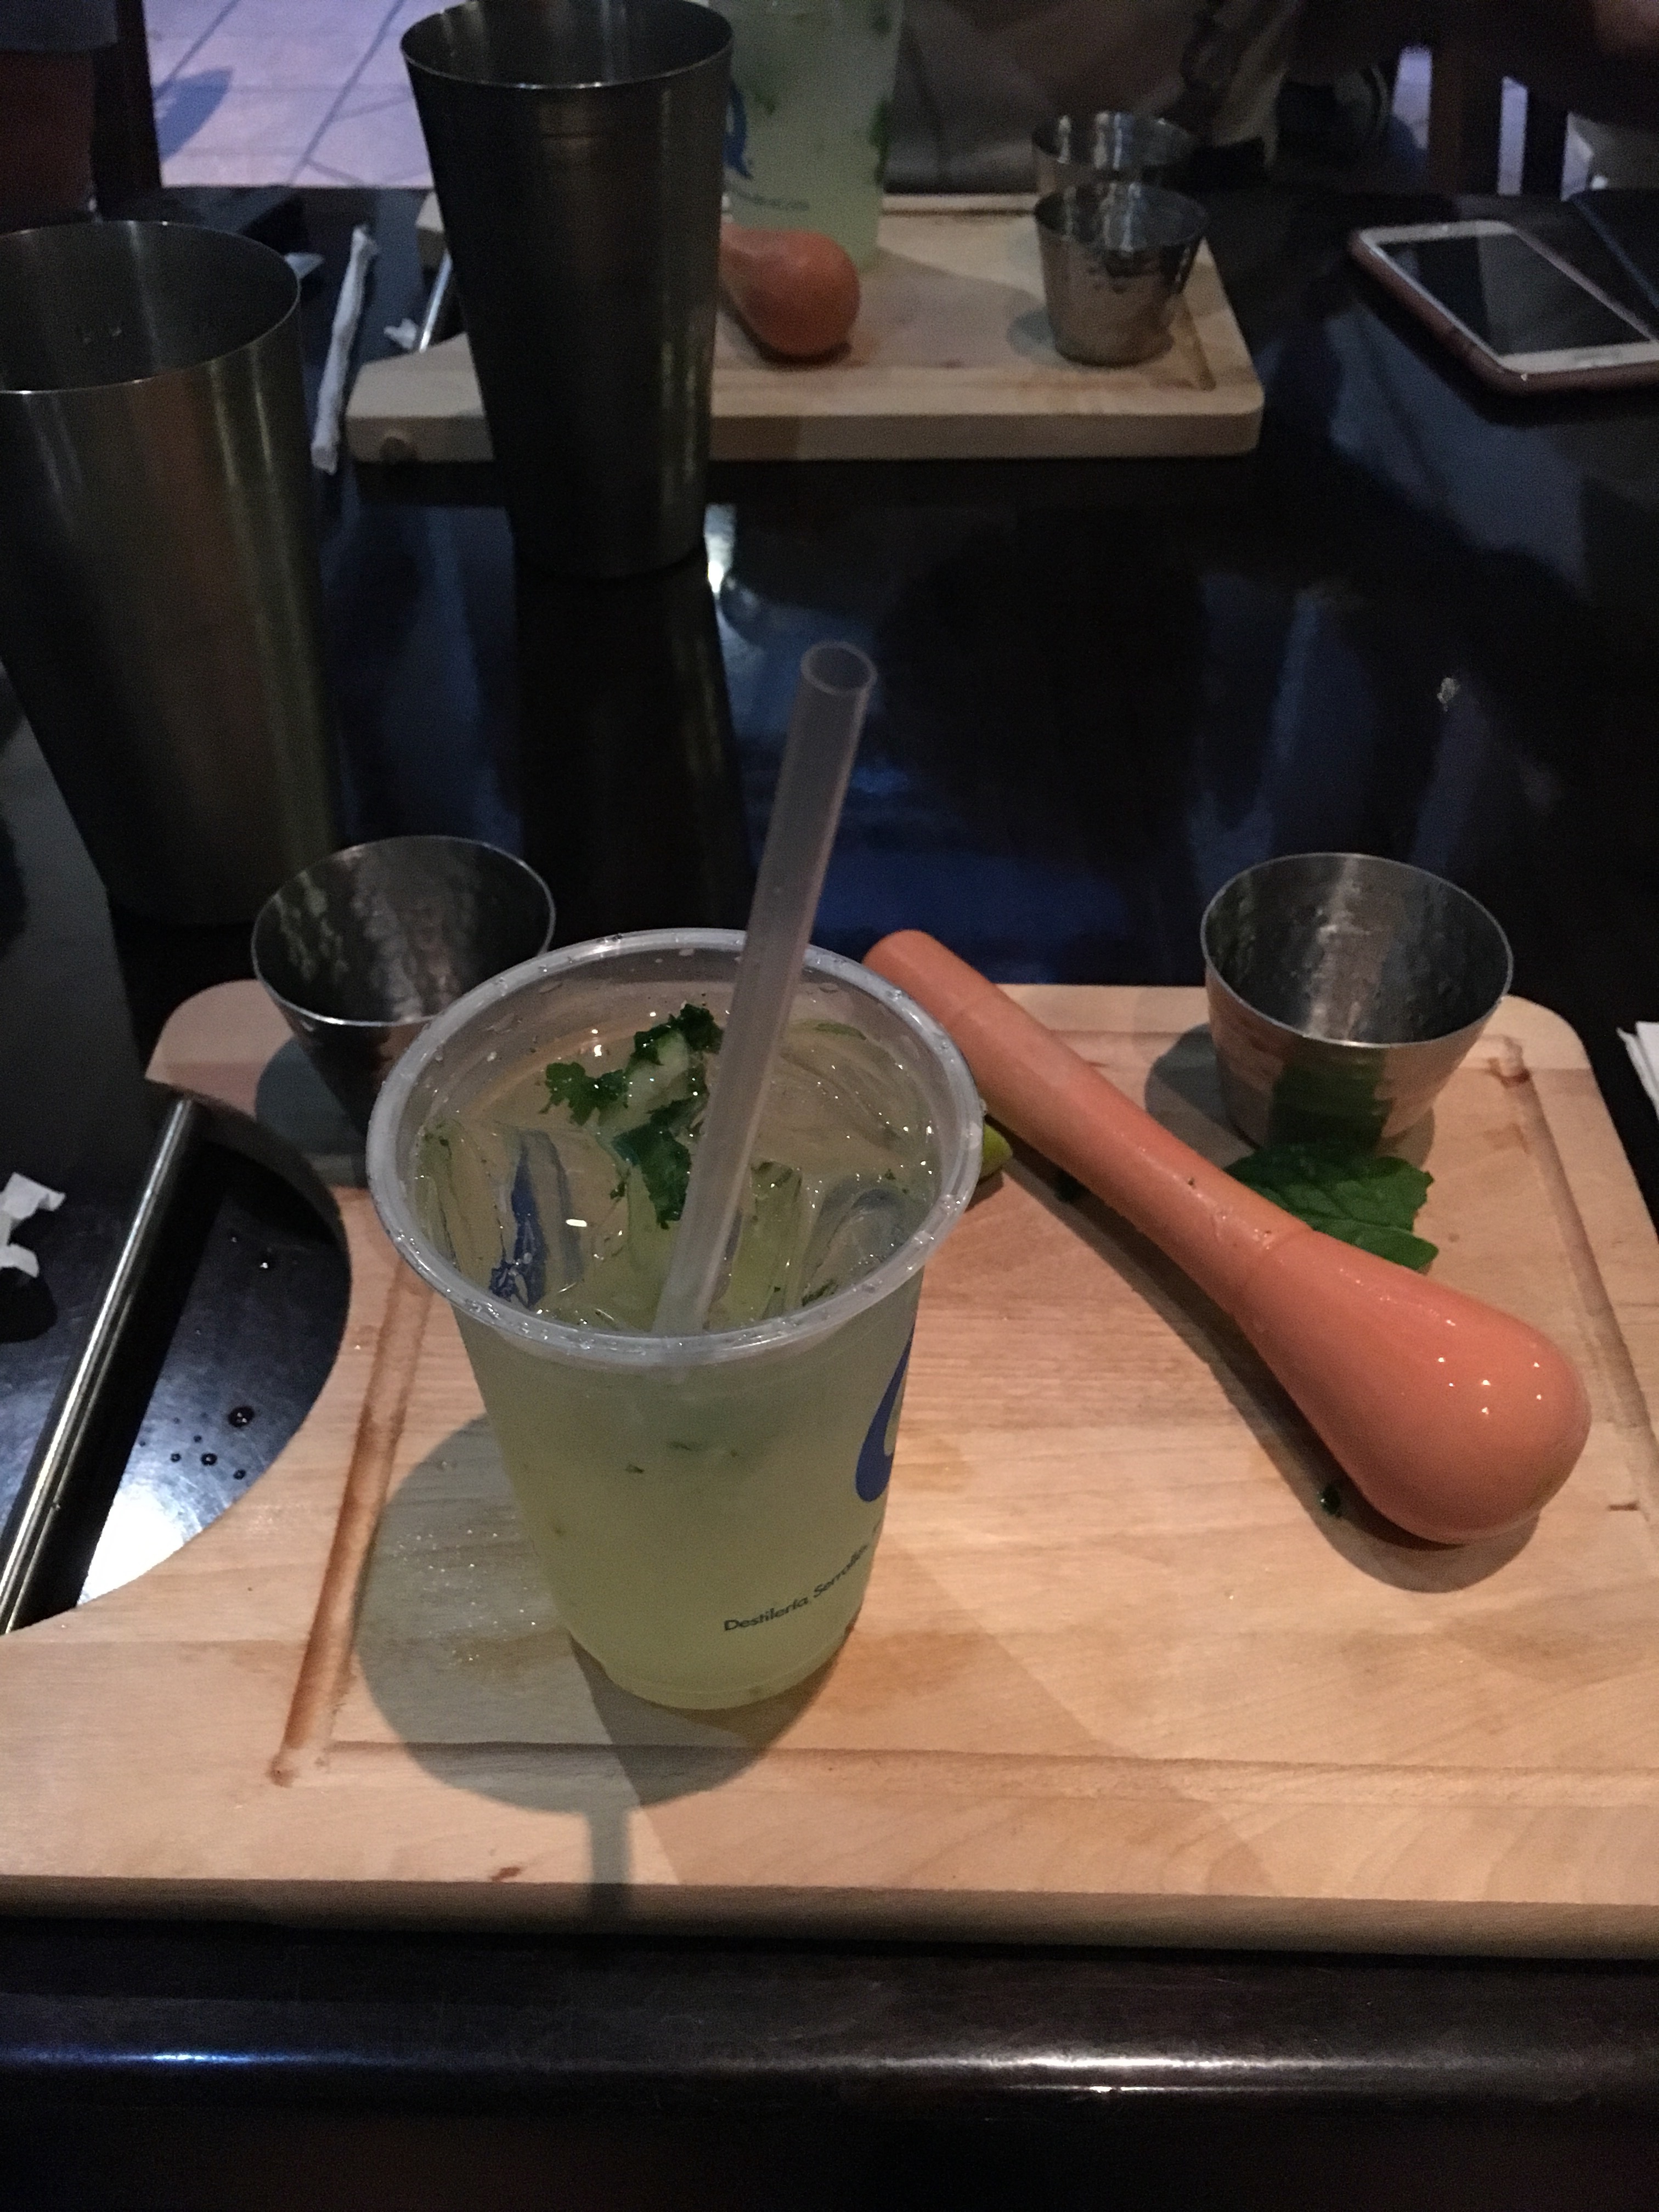 A green alcoholic drink, freshly made on a chopping board with pestle beside in it, in post titled #SoSS shared